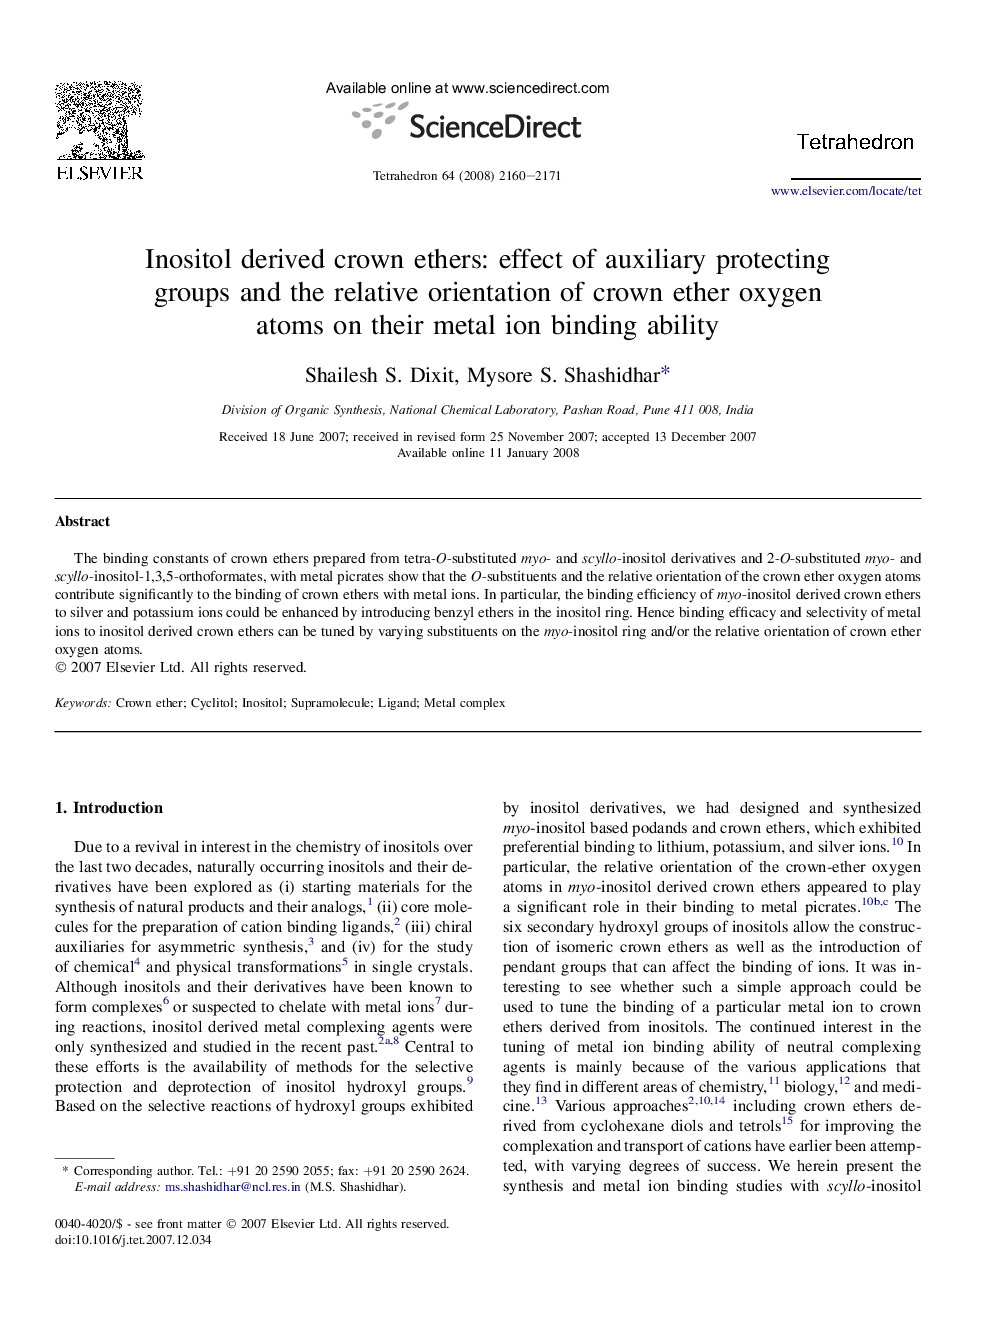 Inositol derived crown ethers: effect of auxiliary protecting groups and the relative orientation of crown ether oxygen atoms on their metal ion binding ability